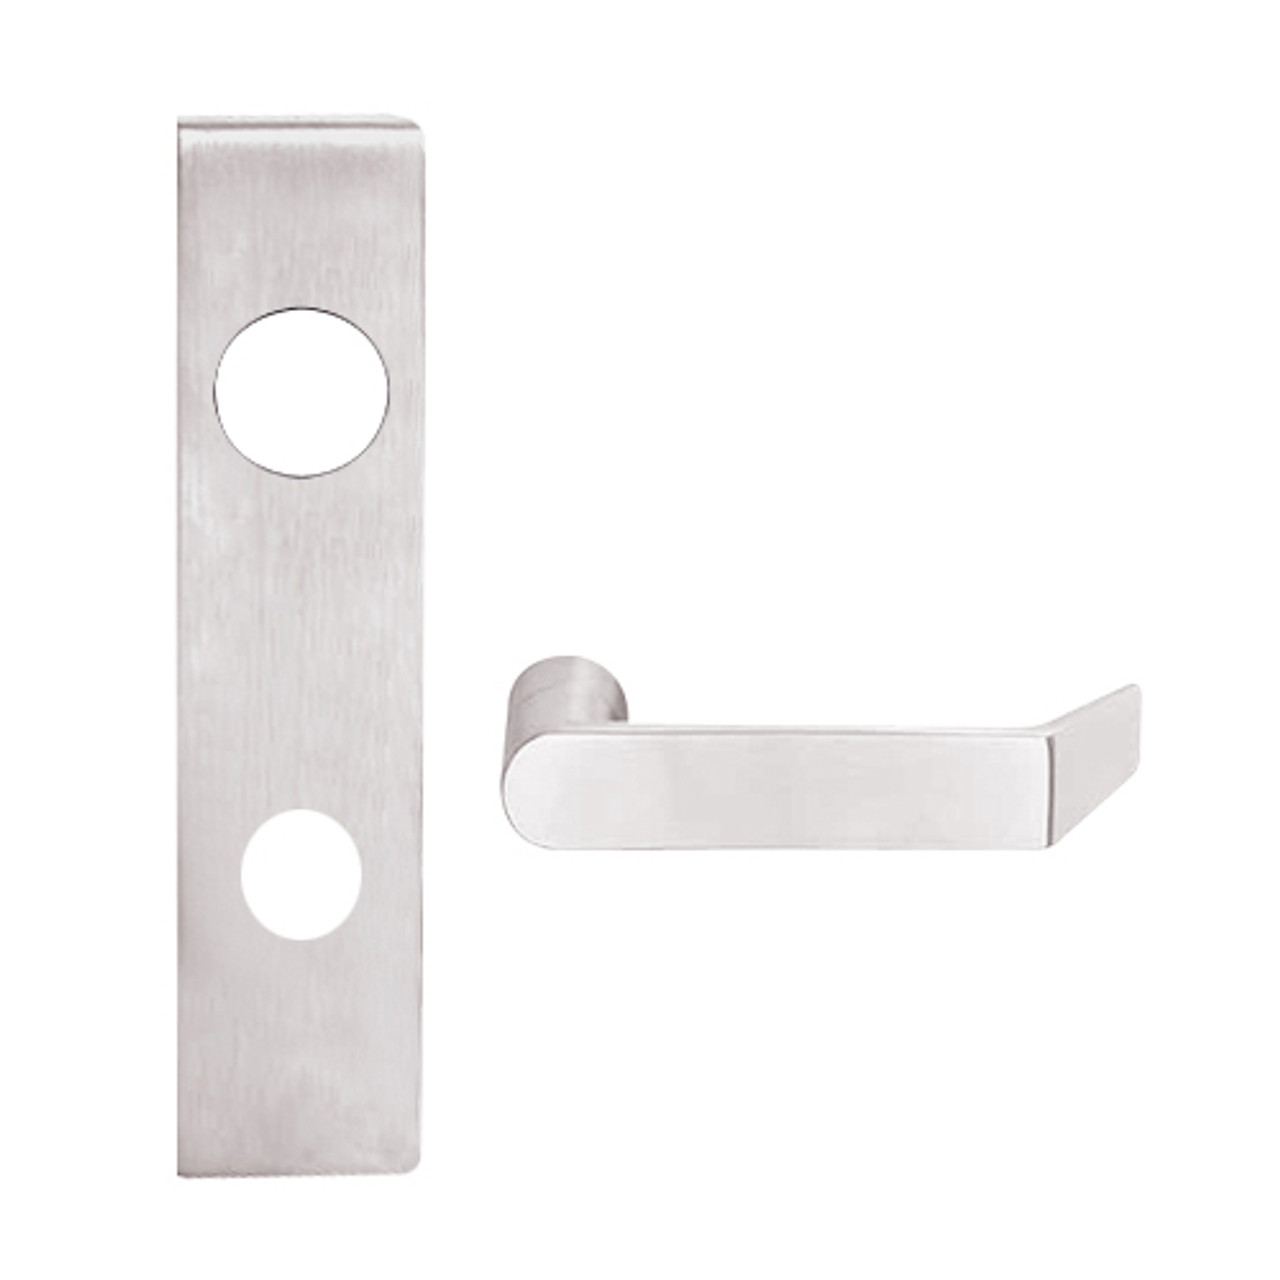 L9456BD-06L-629 Schlage L Series Corridor with Deadbolt Commercial Mortise Lock with 06 Cast Lever Design Prepped for SFIC in Bright Stainless Steel